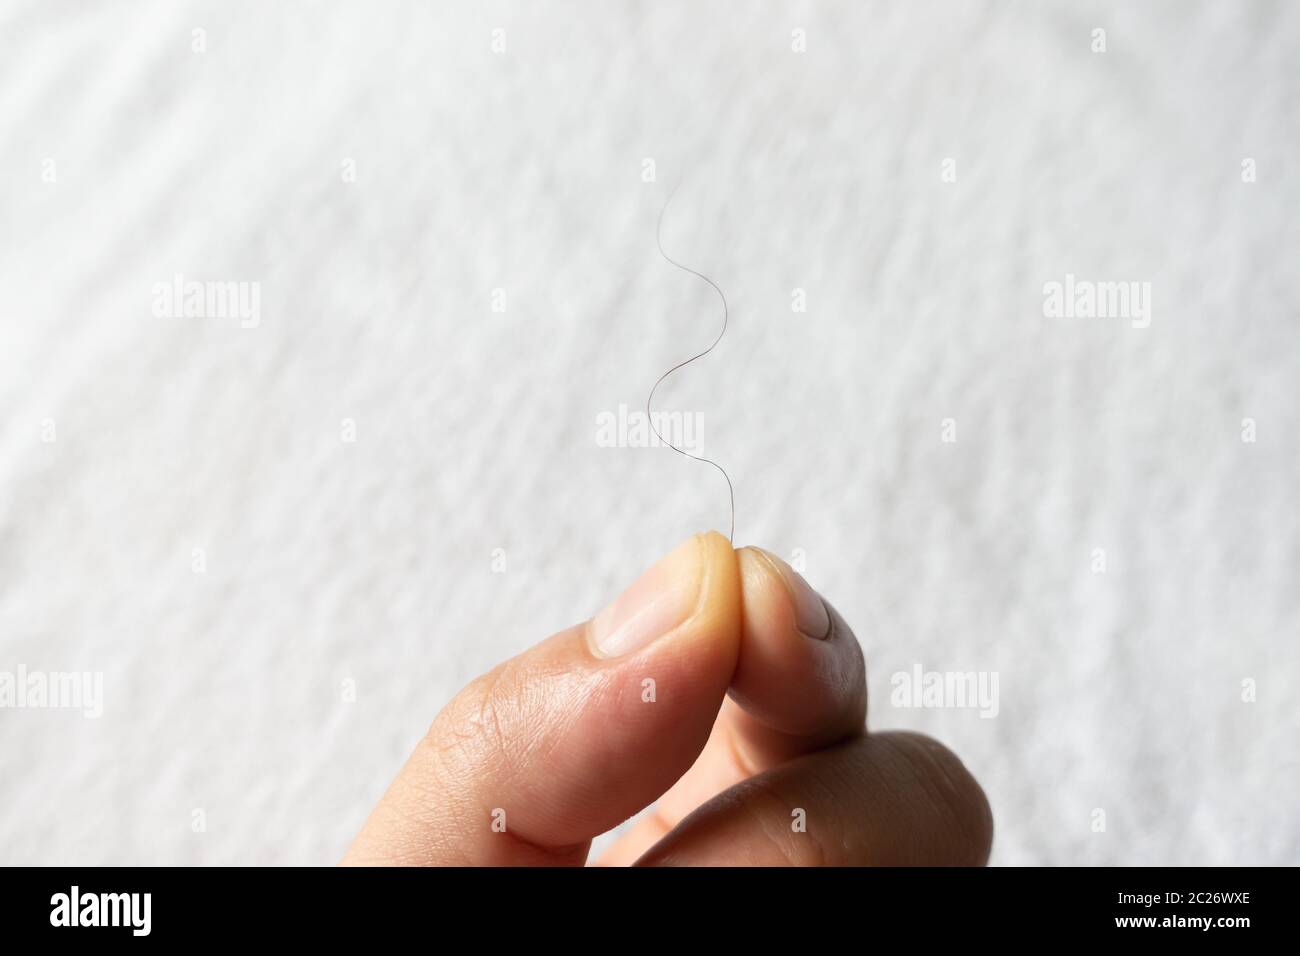 hand hold pubic hair fron towel Stock Photo